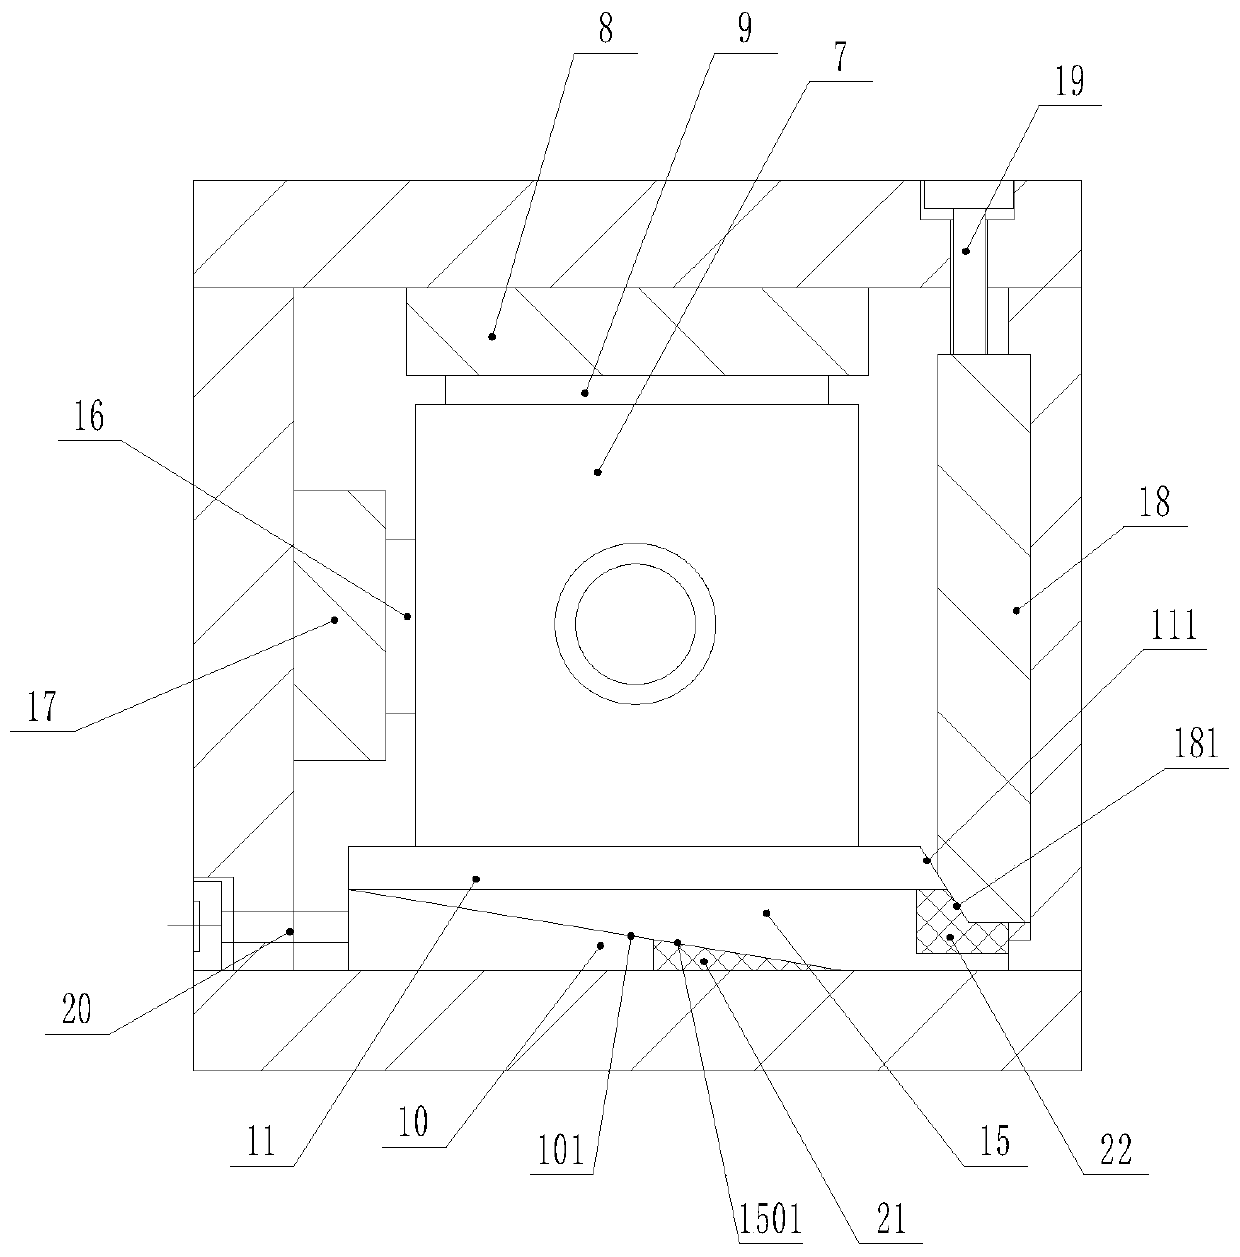 Dust particle size and concentration nondestructive on-line detection device and method